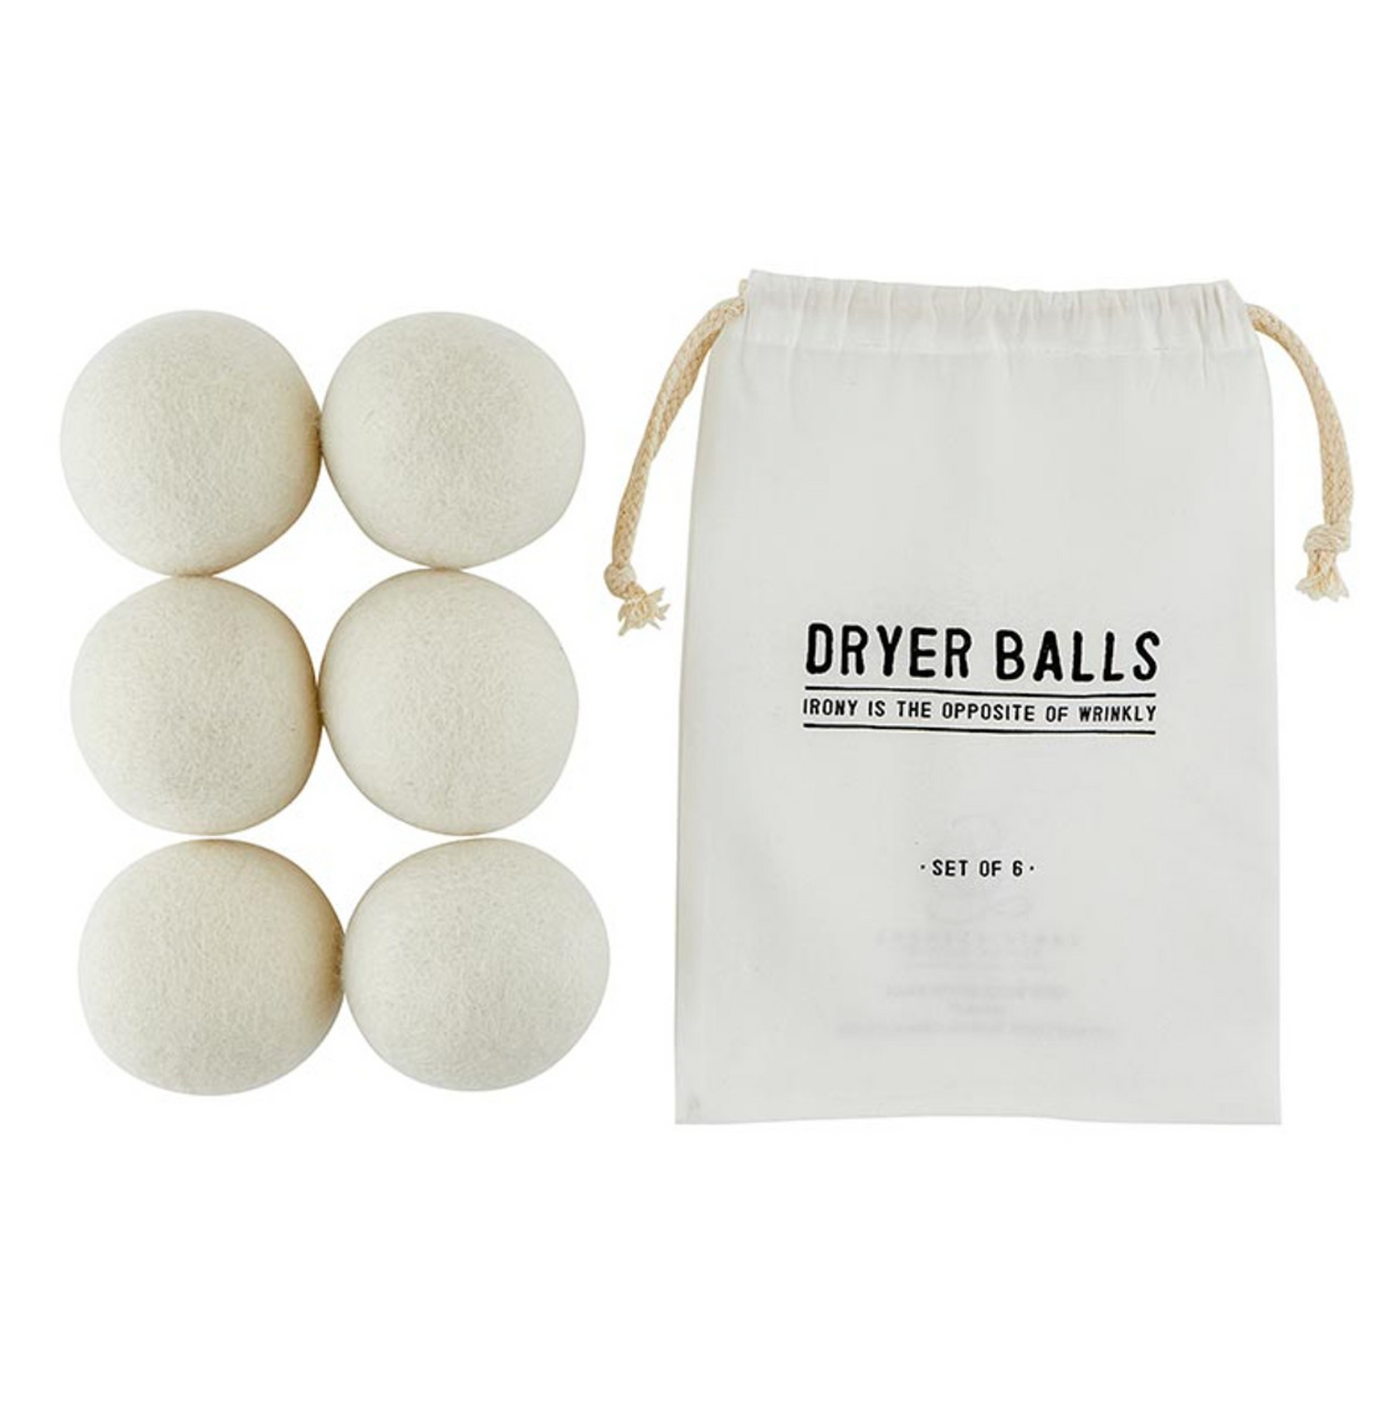 SET OF 6 DRYER WOOL BALLS IN GLASS CANISTER